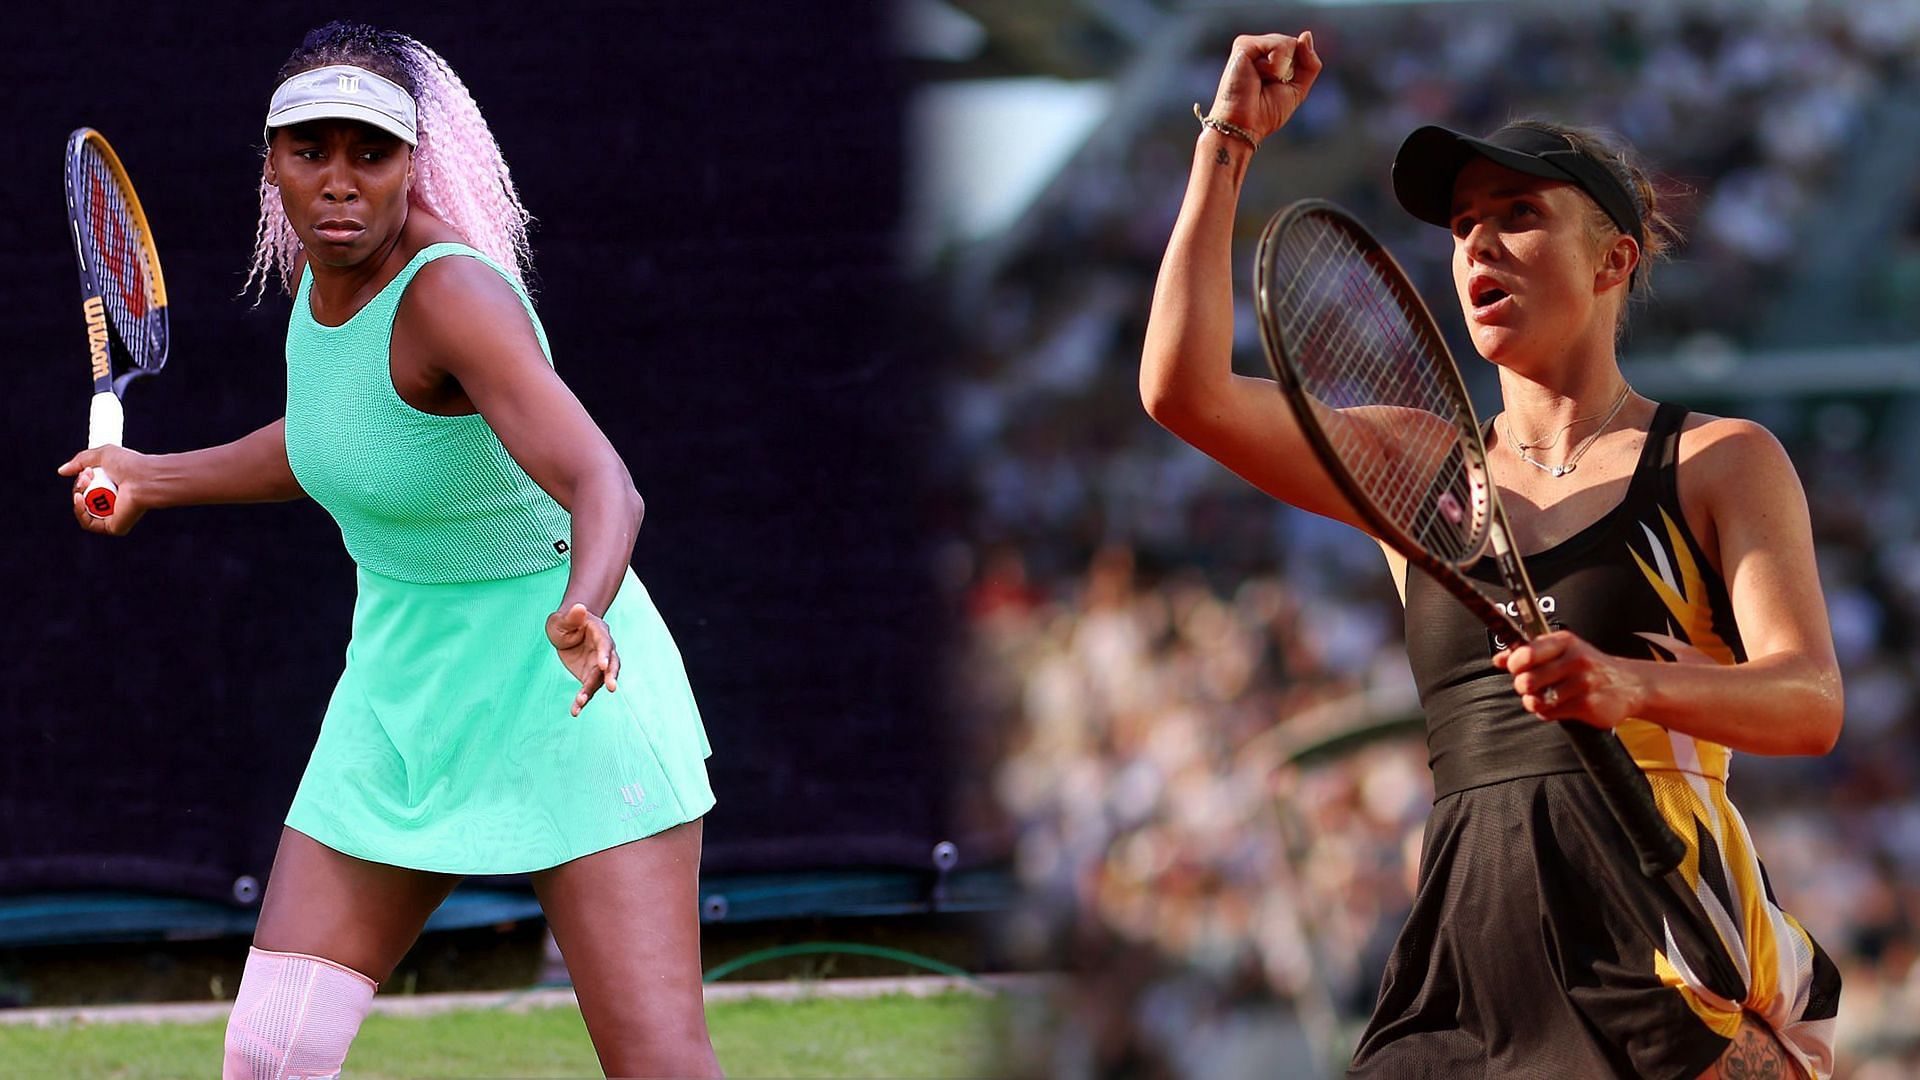 Venus Williams vs Elina Svitolina is one of the first-round matches at the 2023 Wimbledon.